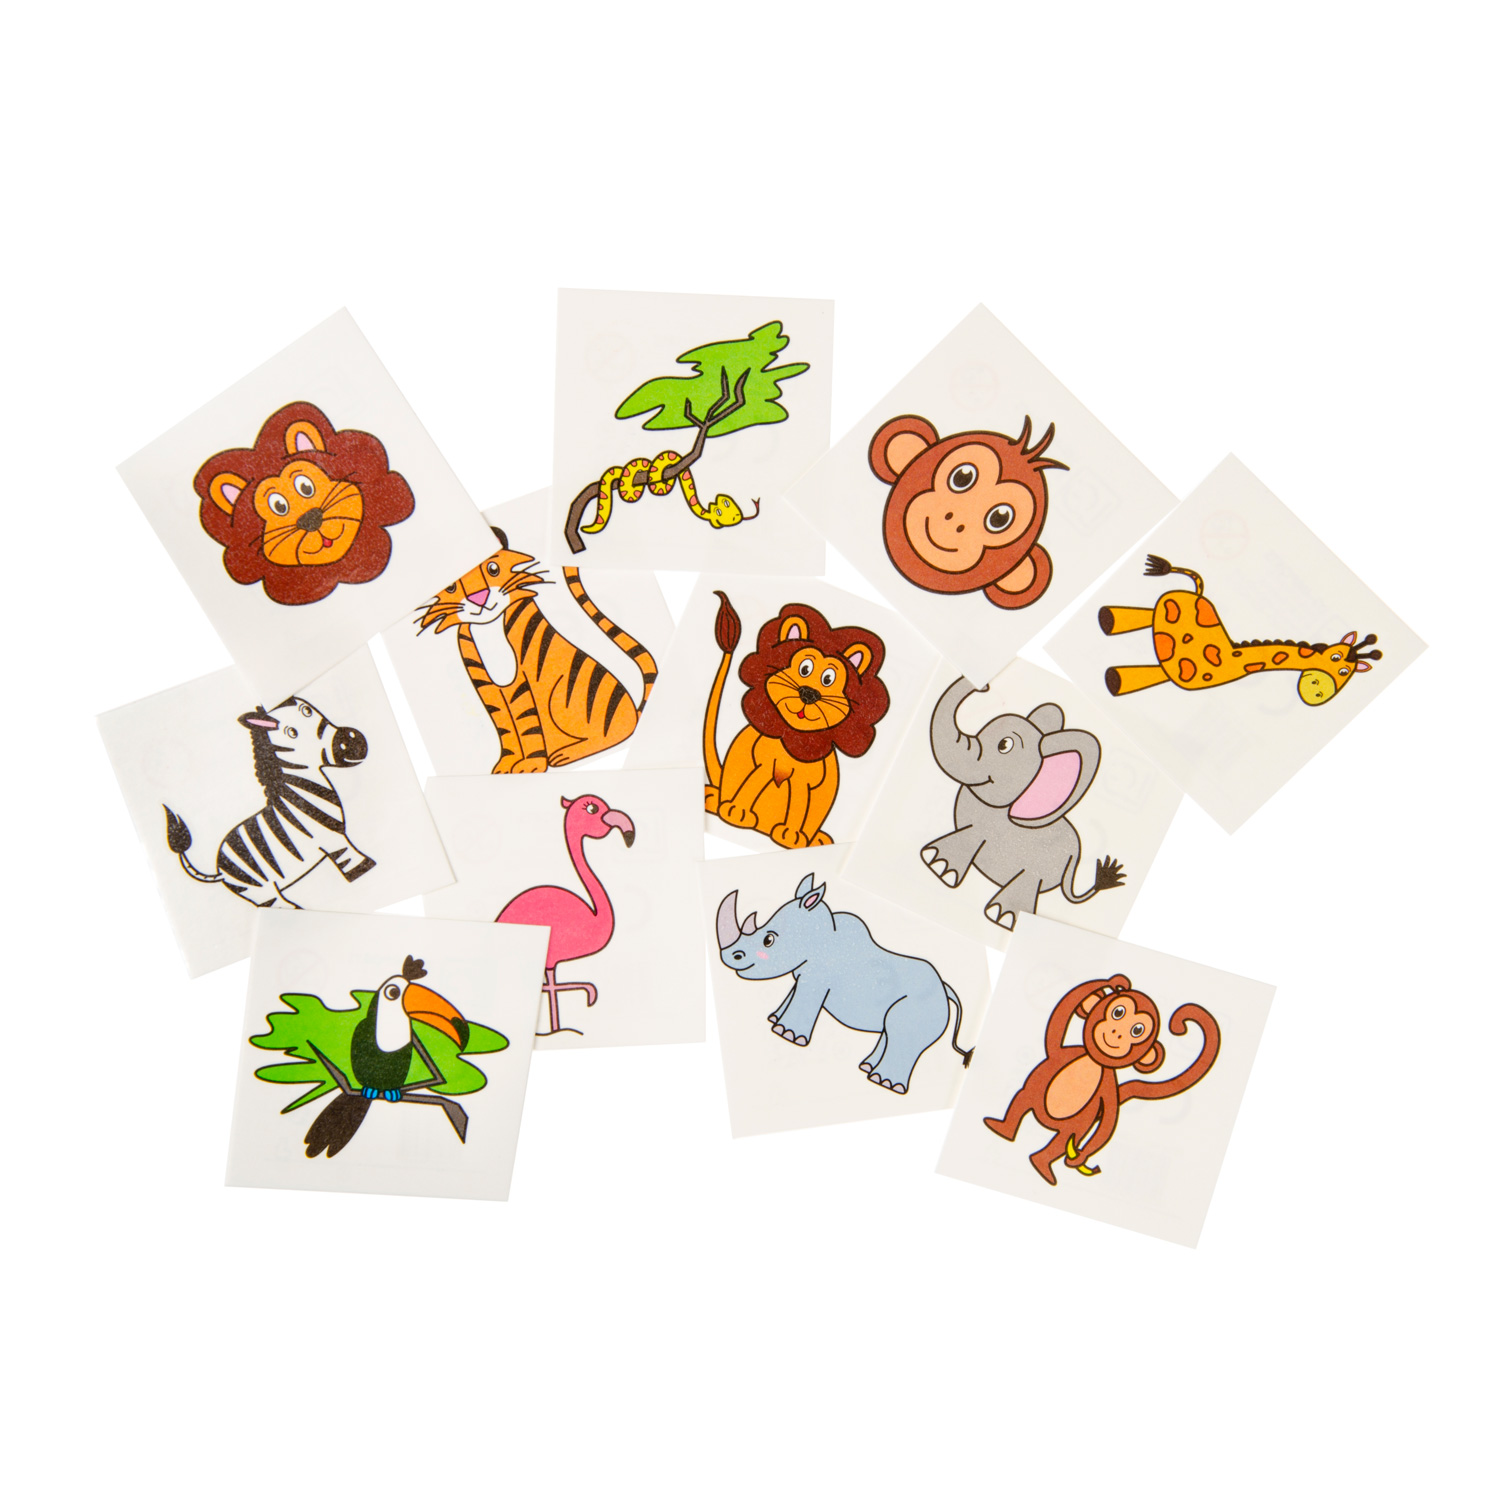 Wholesale Temporary Tattoos - Zoo Animals, Ages 3+, 1.5